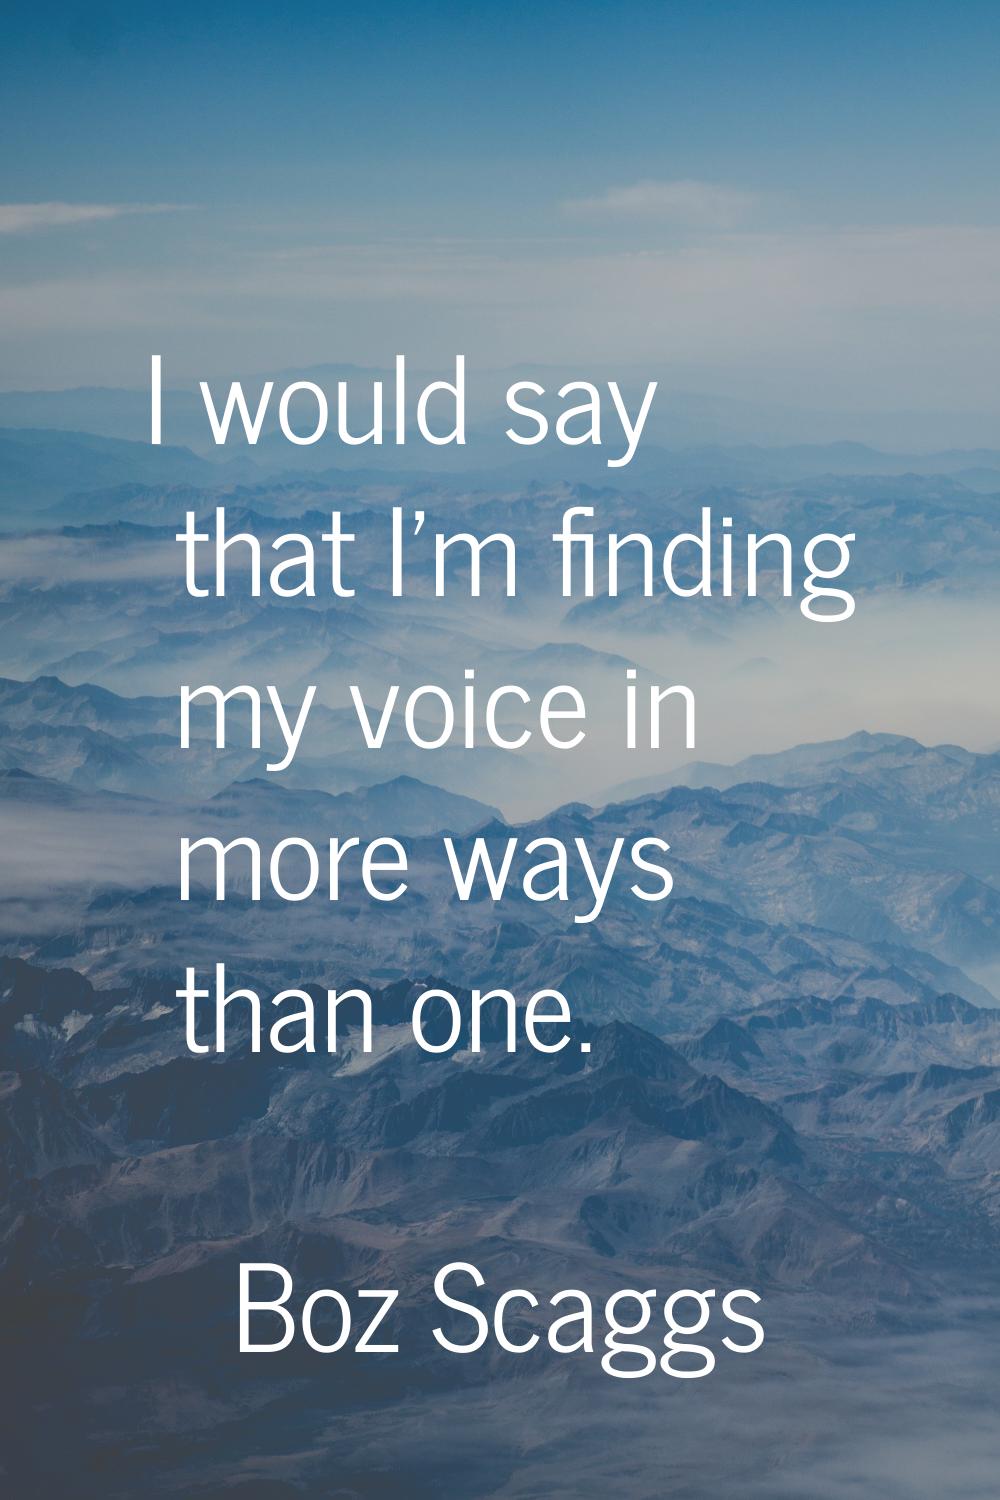 I would say that I'm finding my voice in more ways than one.